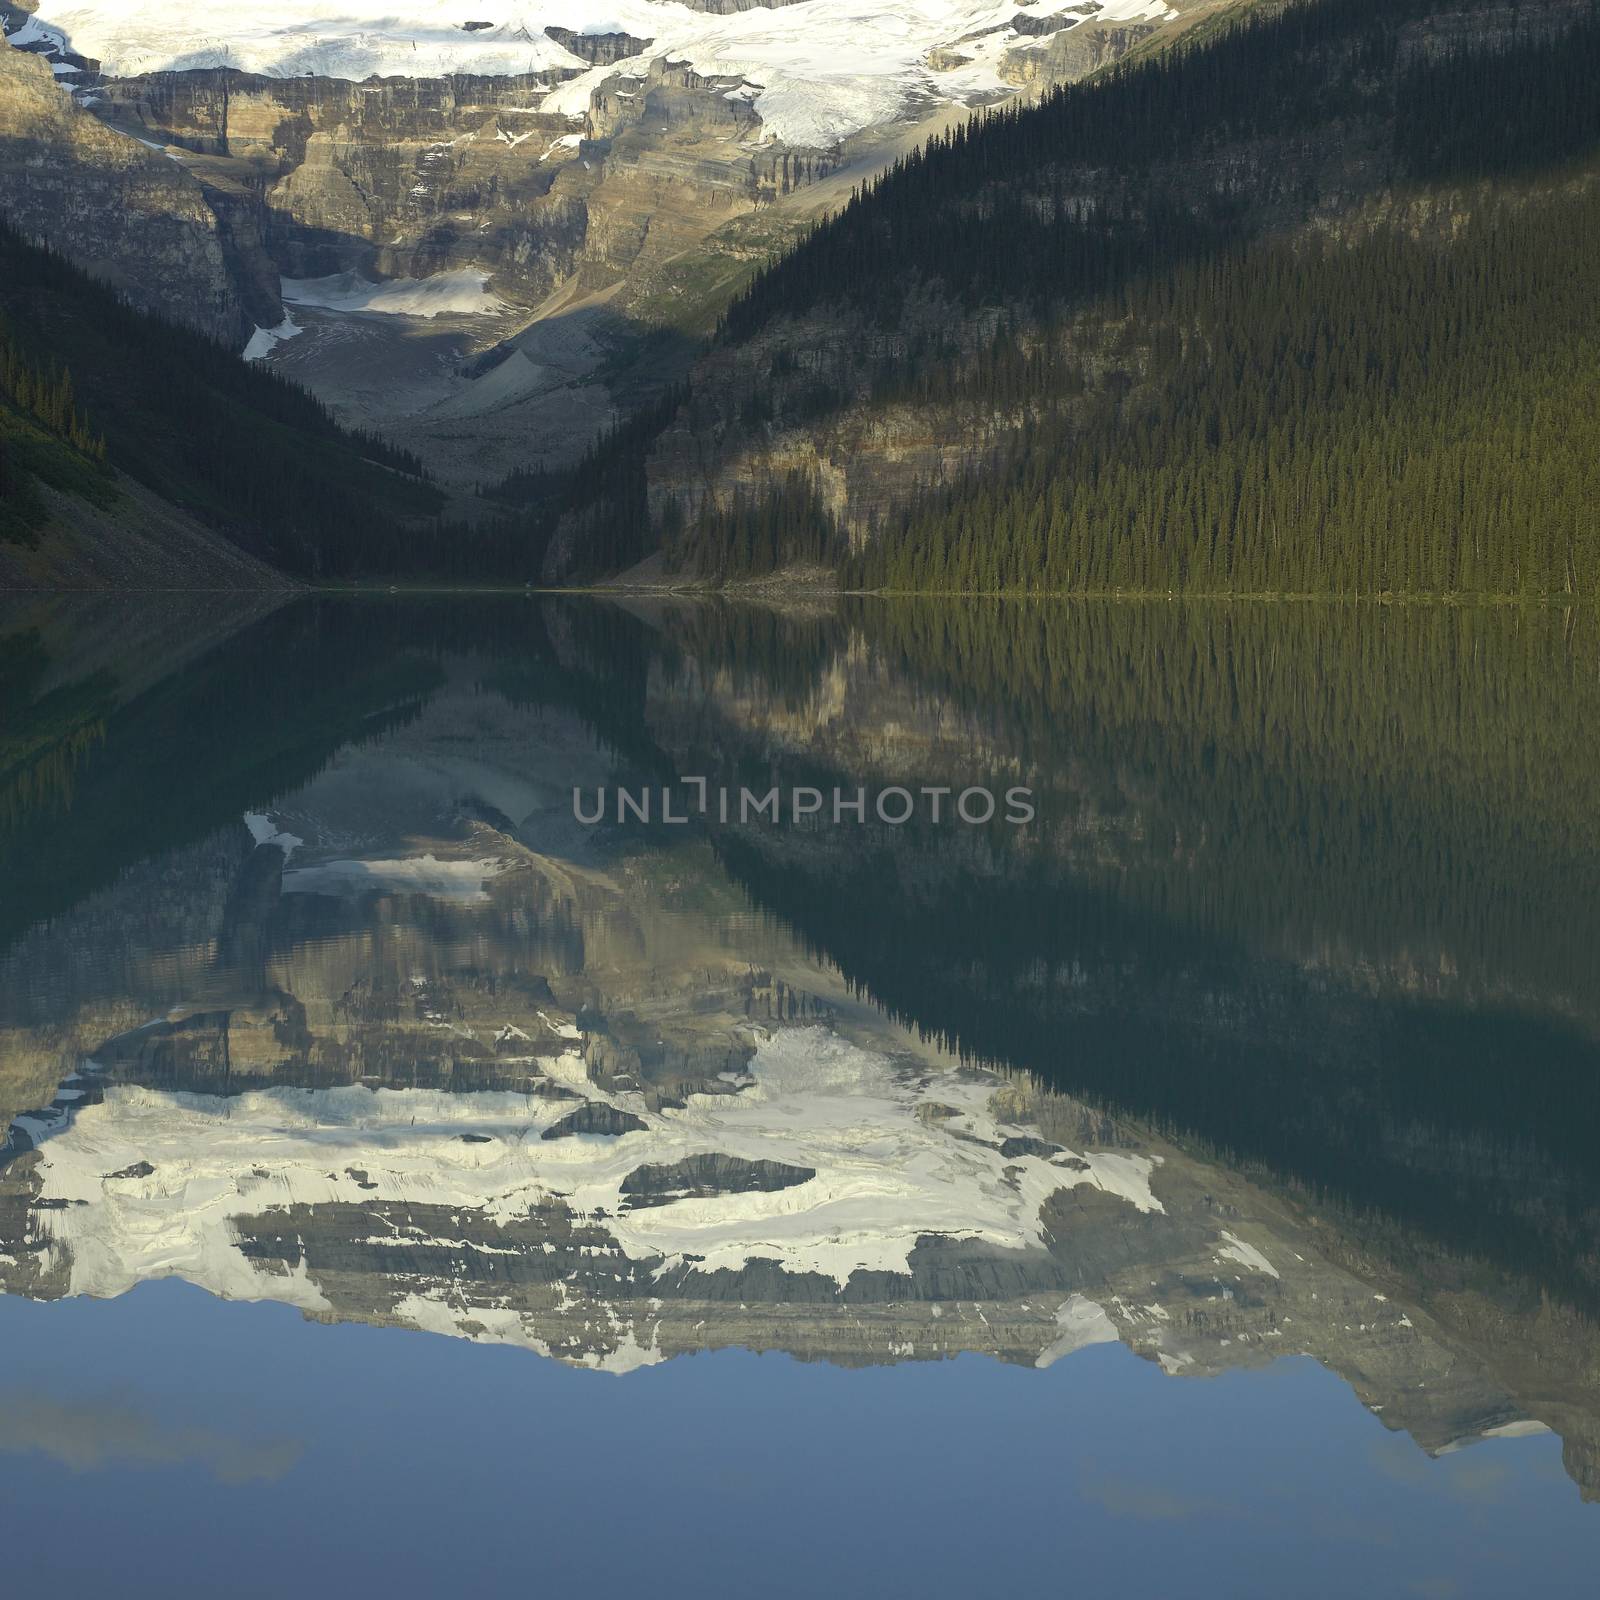 Mountains with snow reflected in a calm lake